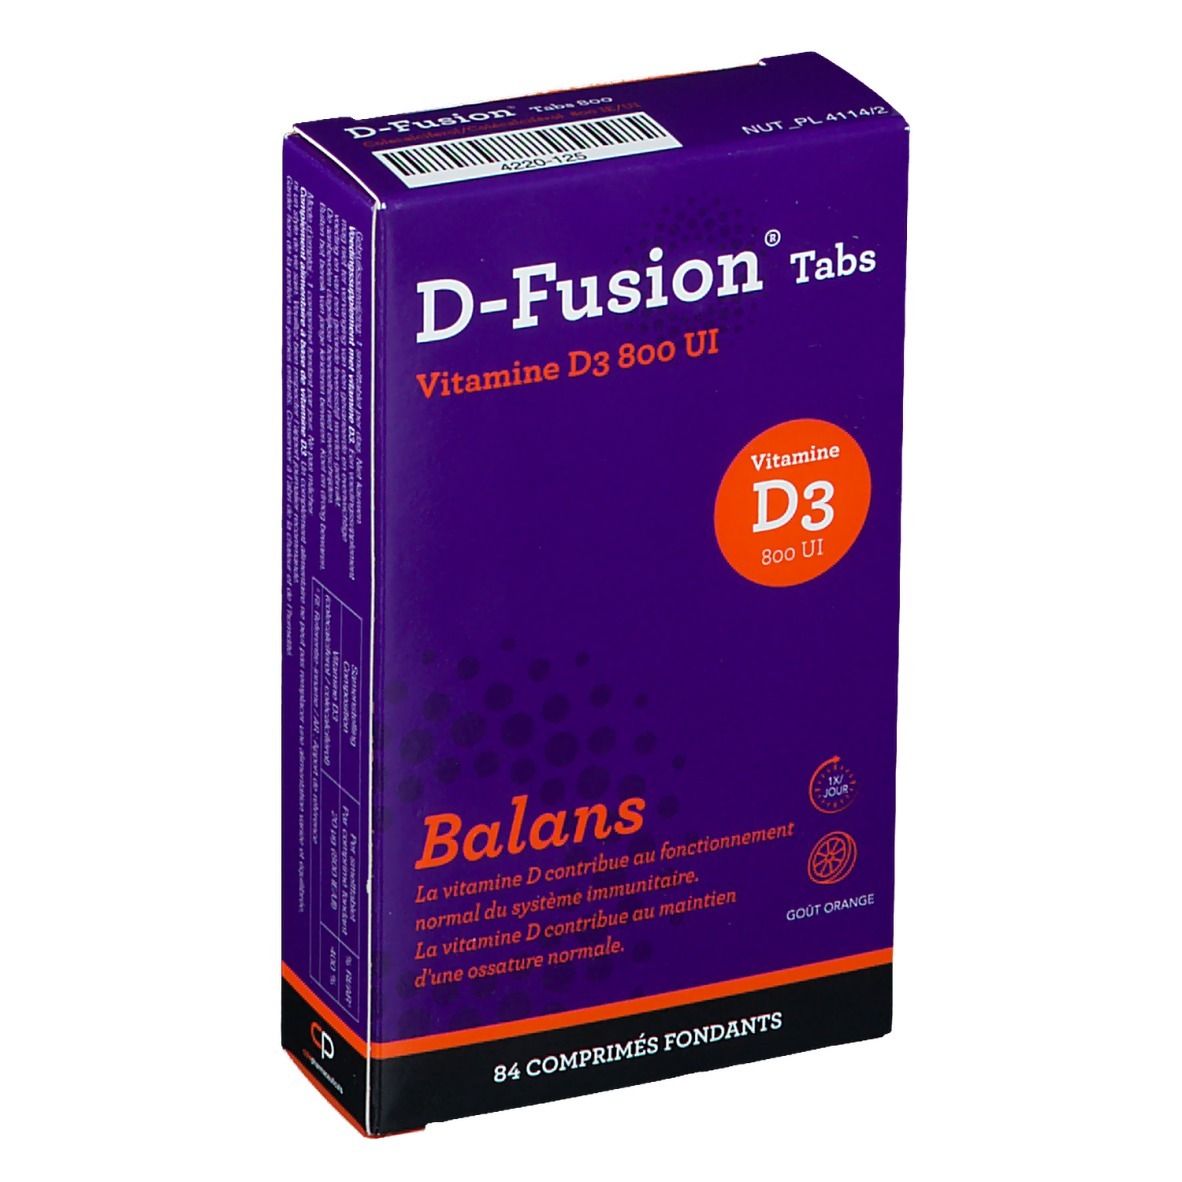 Image of D-Fusion® Tabs Vitamin D3 800 IE